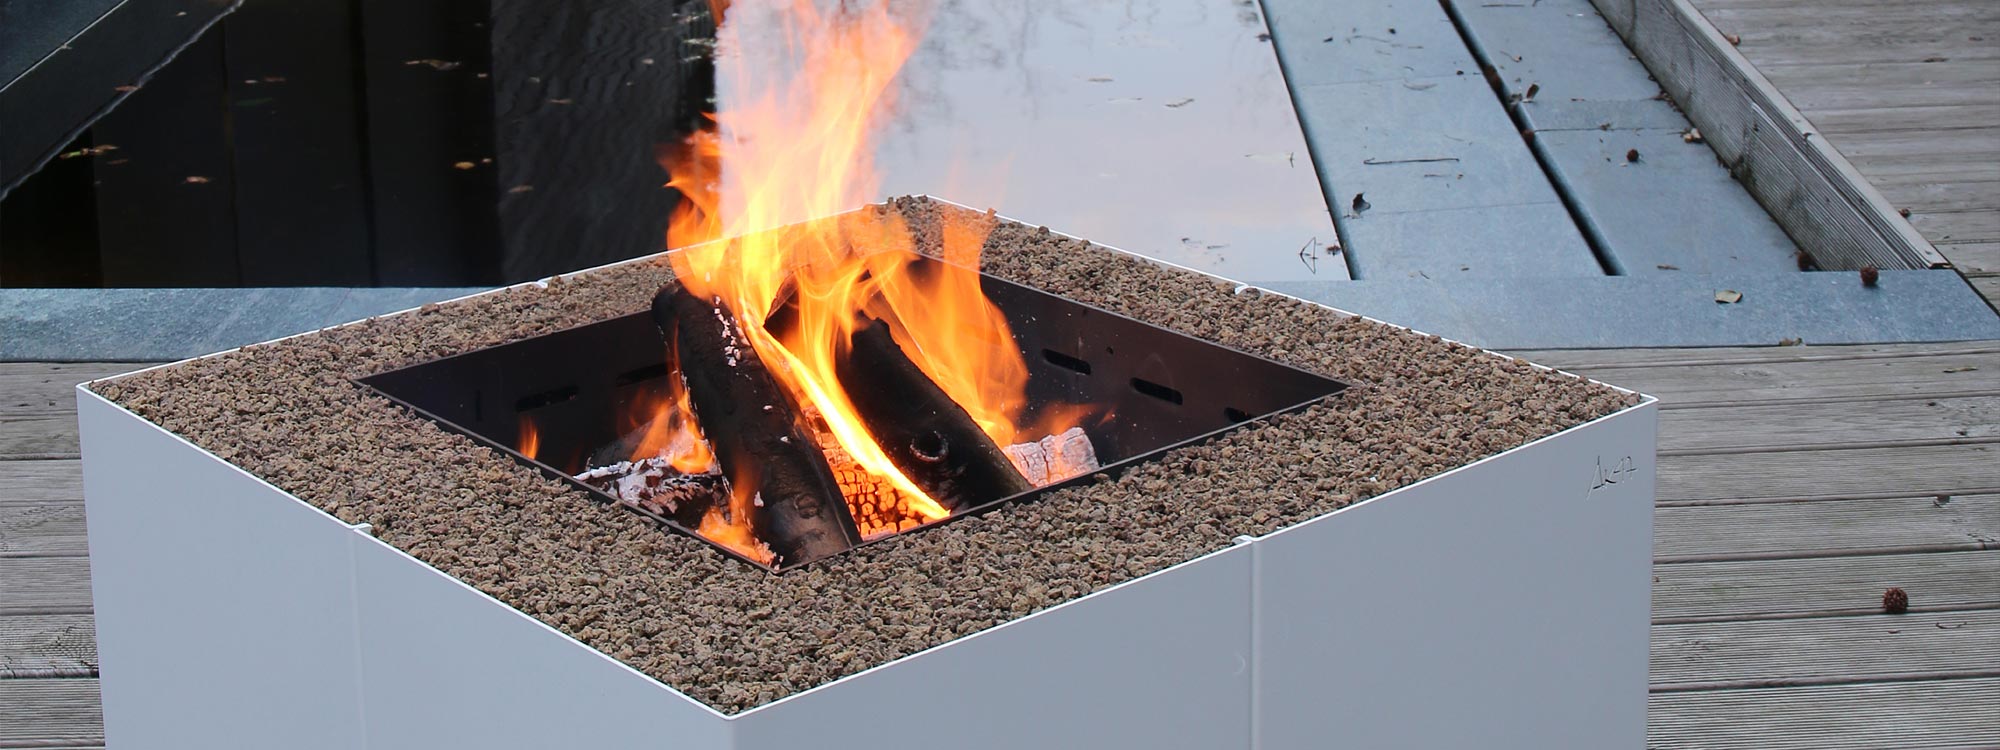 Dado geometric fire pit is a square modern fire pit in Vintage Brown or White fire pit finishes by AK47 luxury fire pit company, Italy.